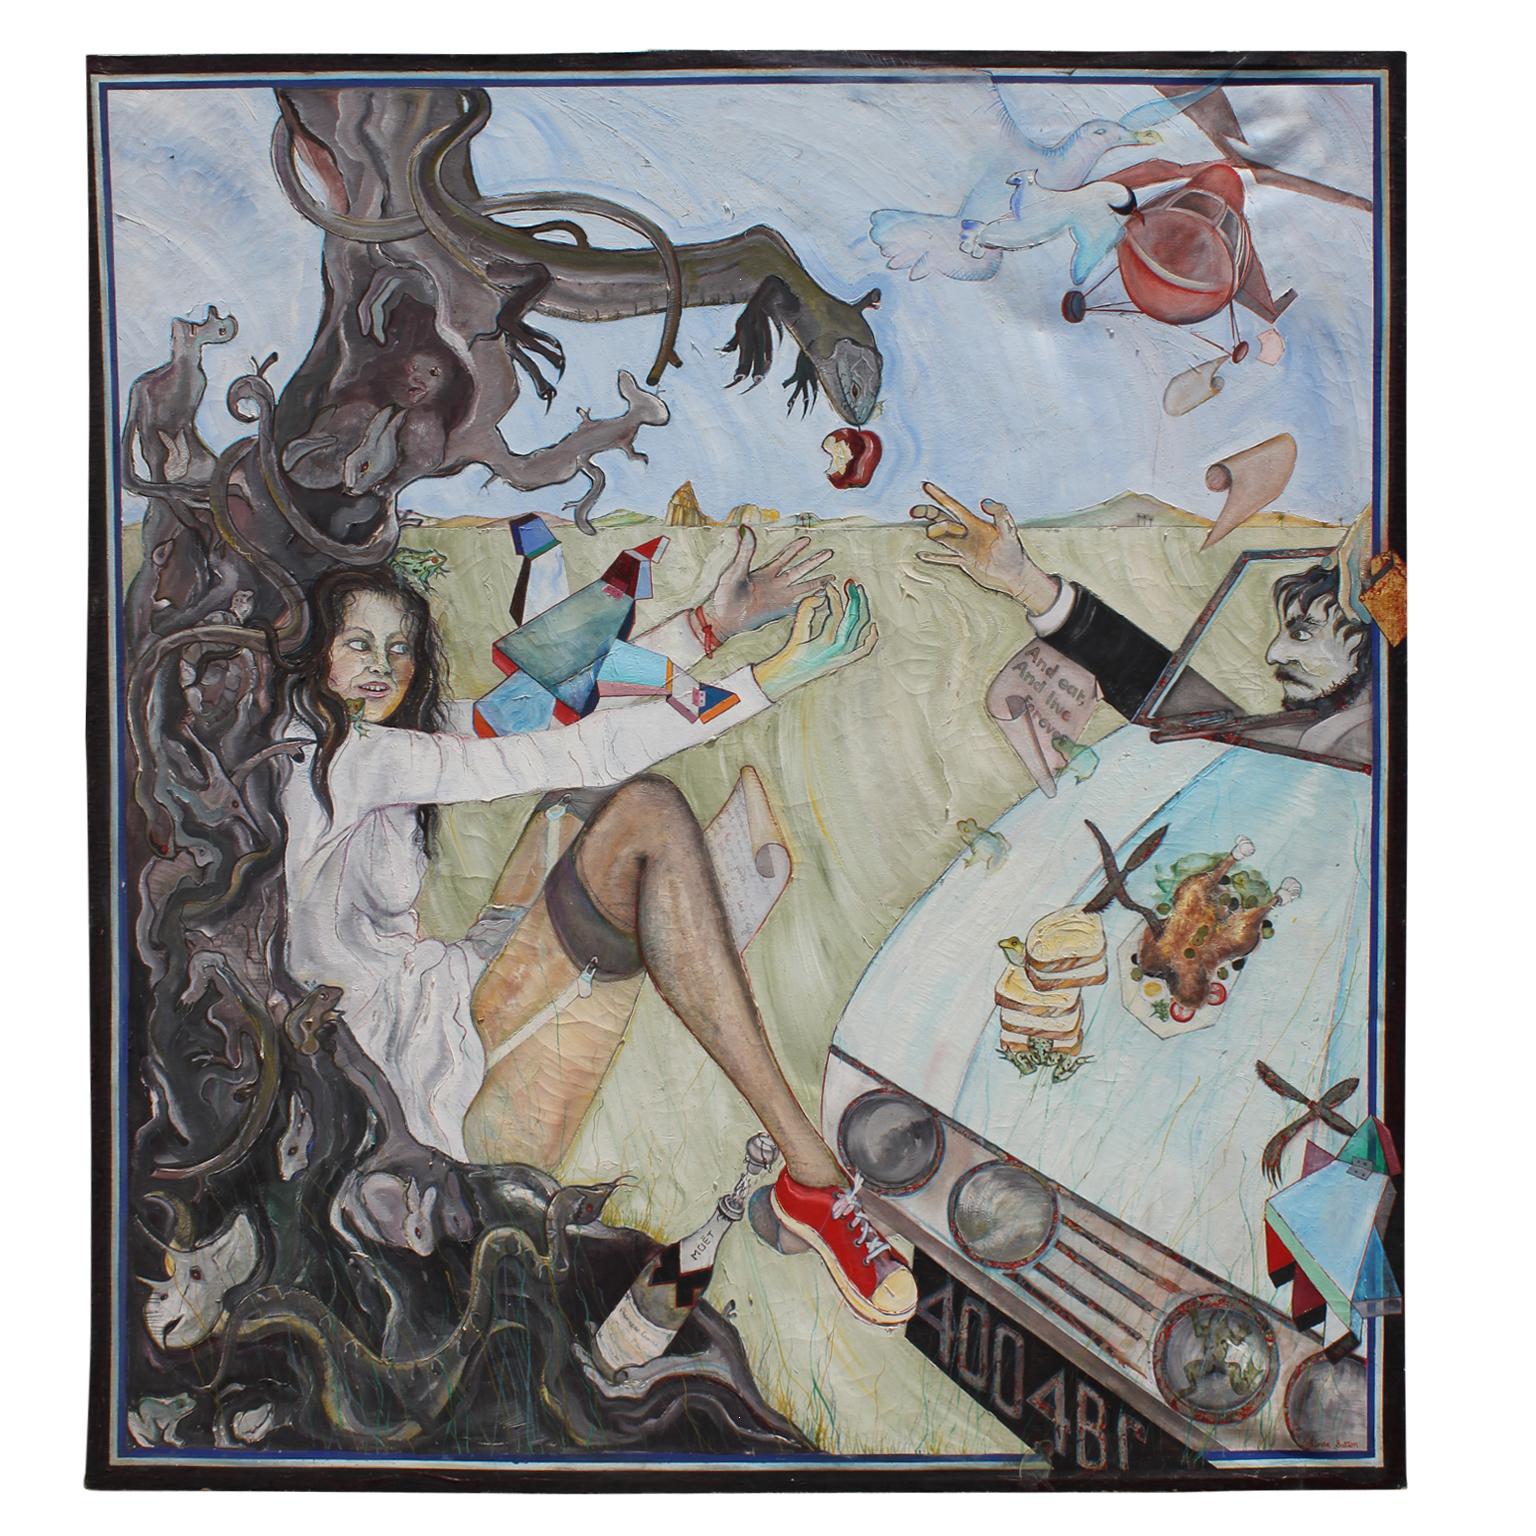 Linda Sutton Figurative Painting - Human Folly Large Scale Surrealist Painting with Garden of Eden Theme